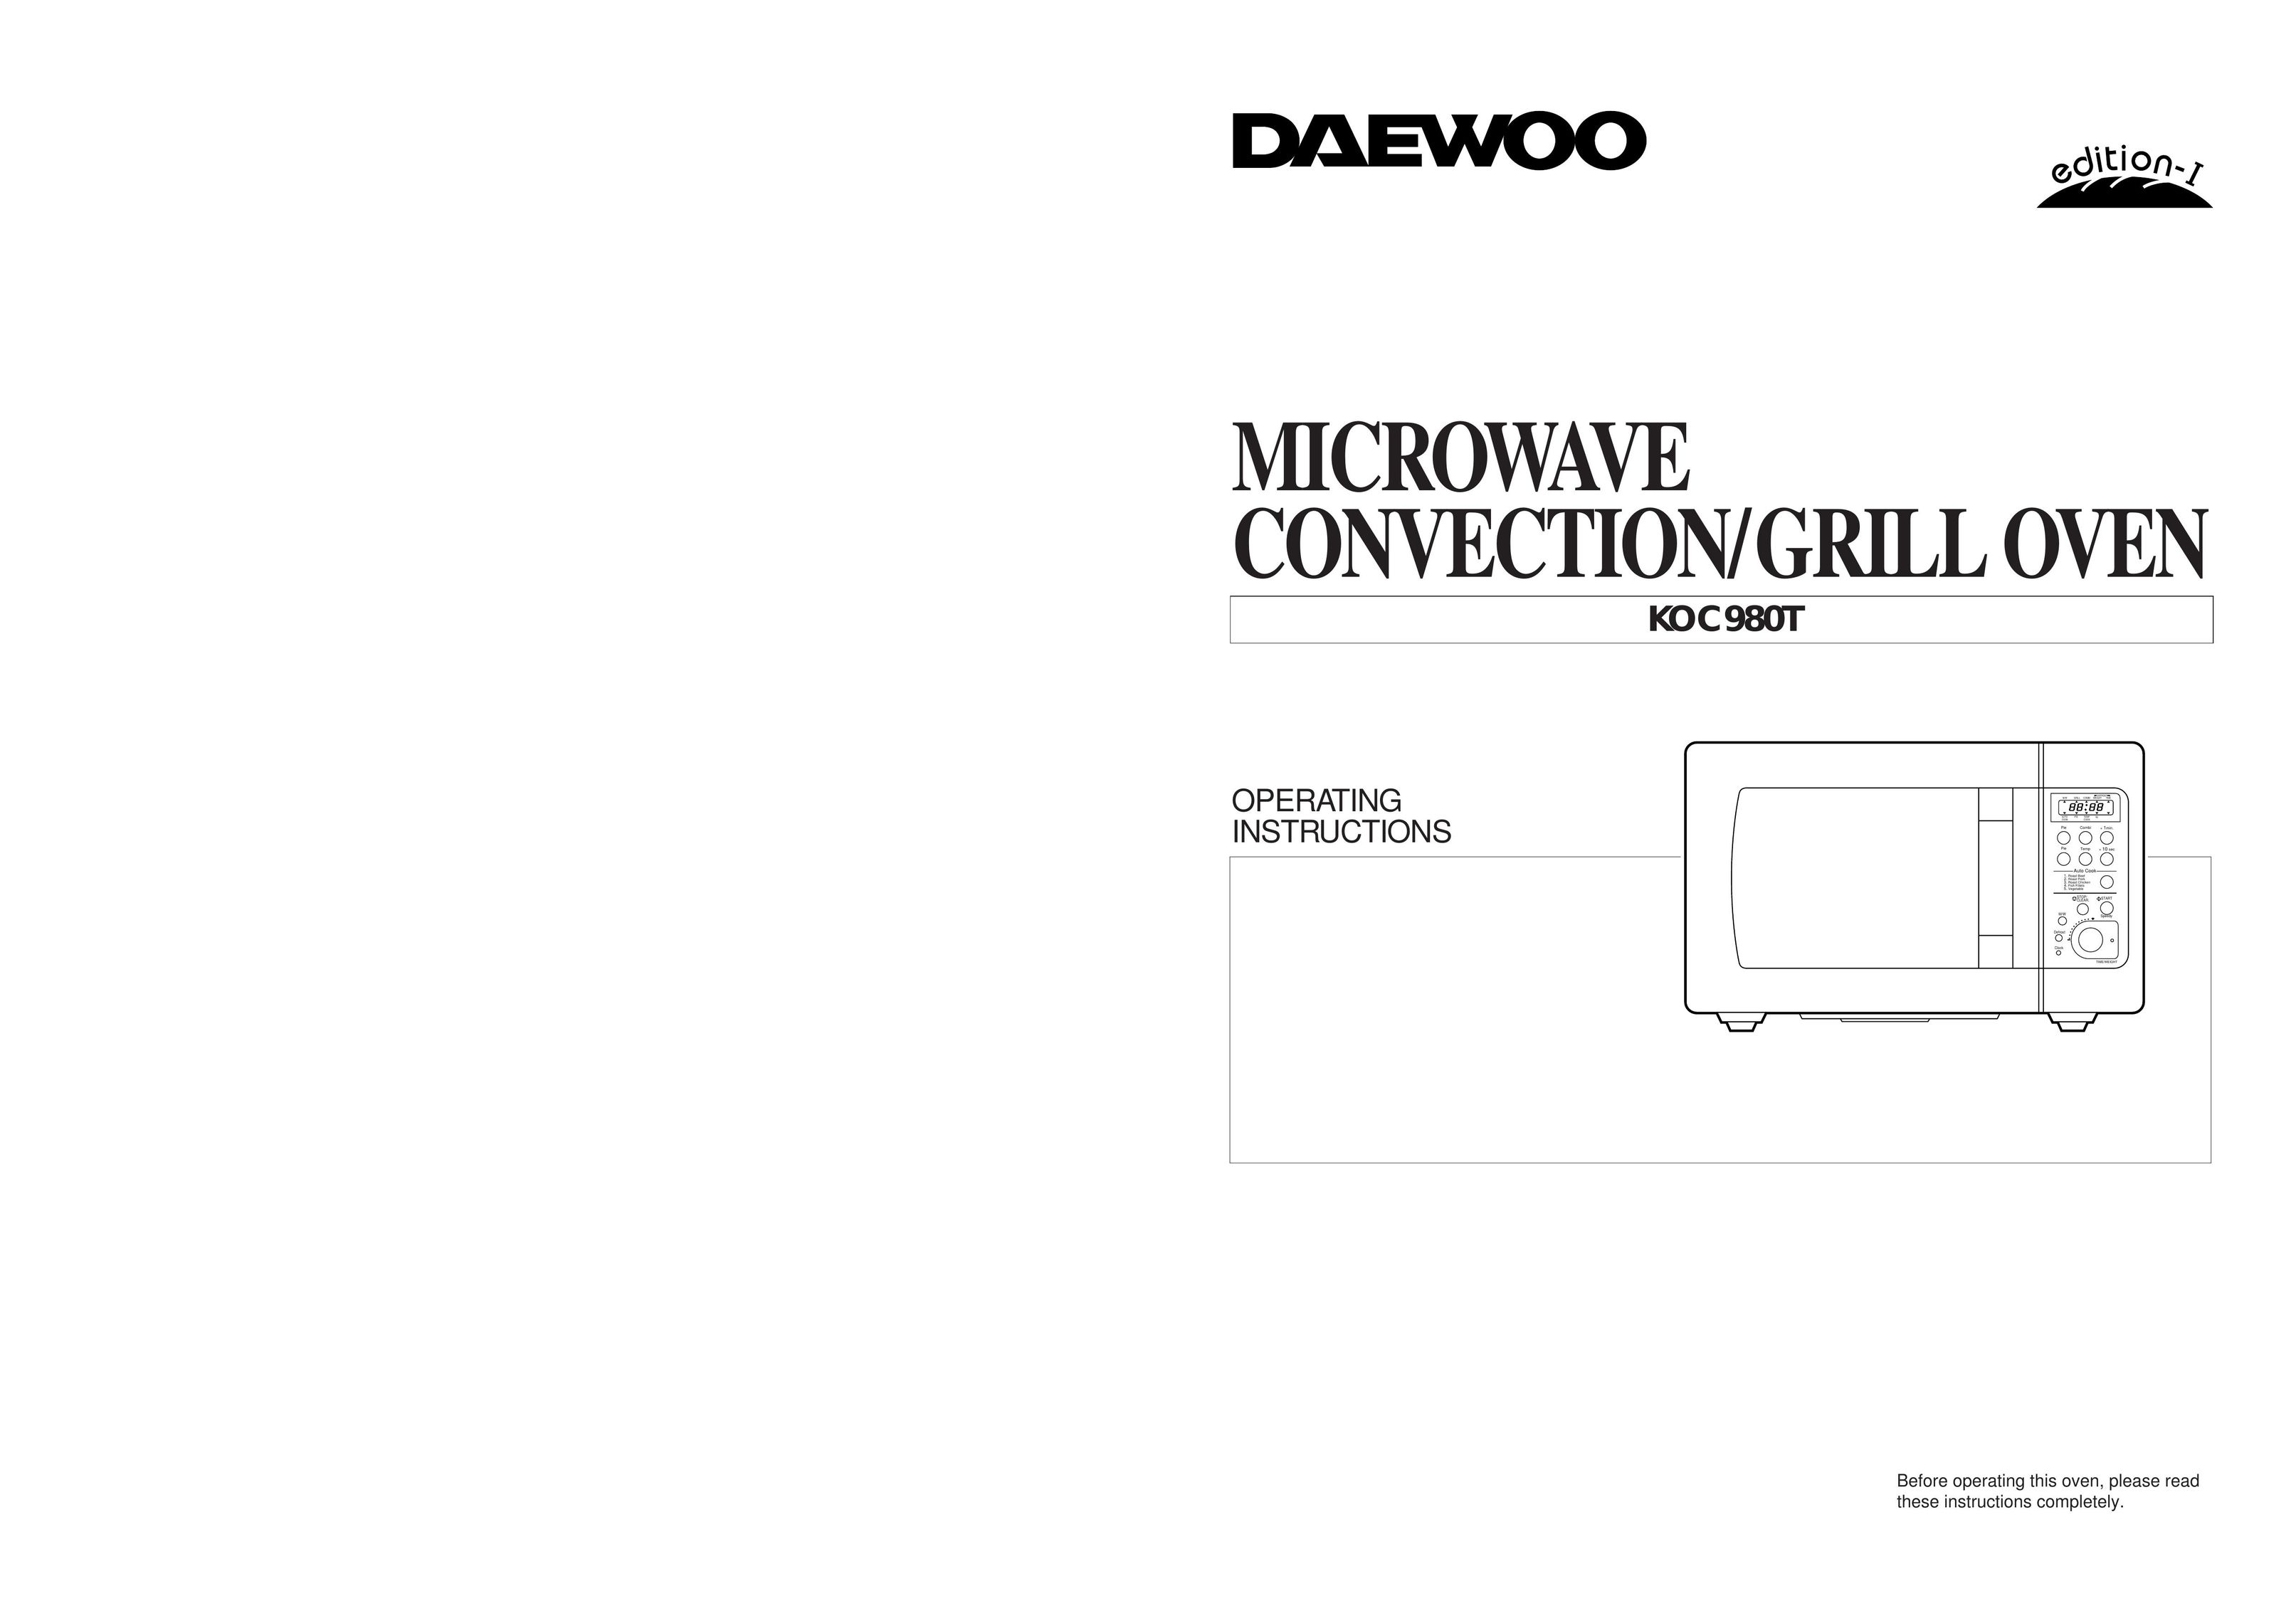 Daewoo KOC980T Convection Oven User Manual